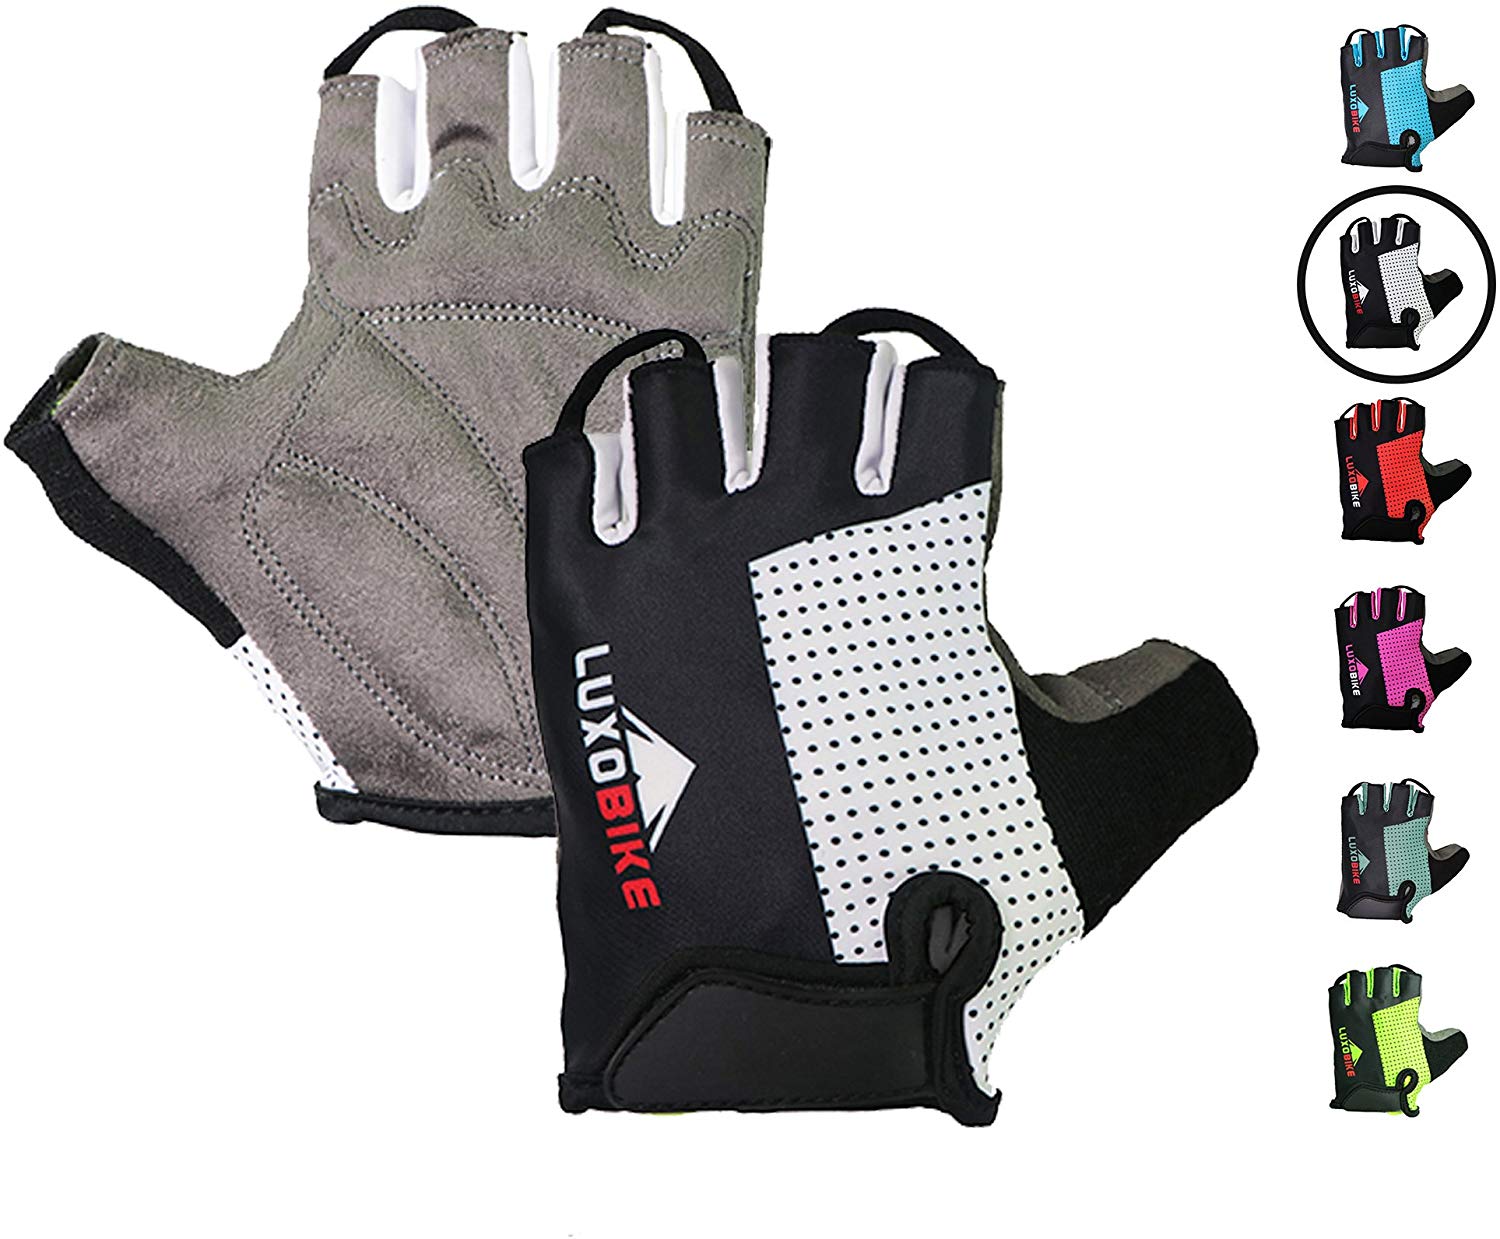 LuxoBike Padded Men's Cycling Gloves